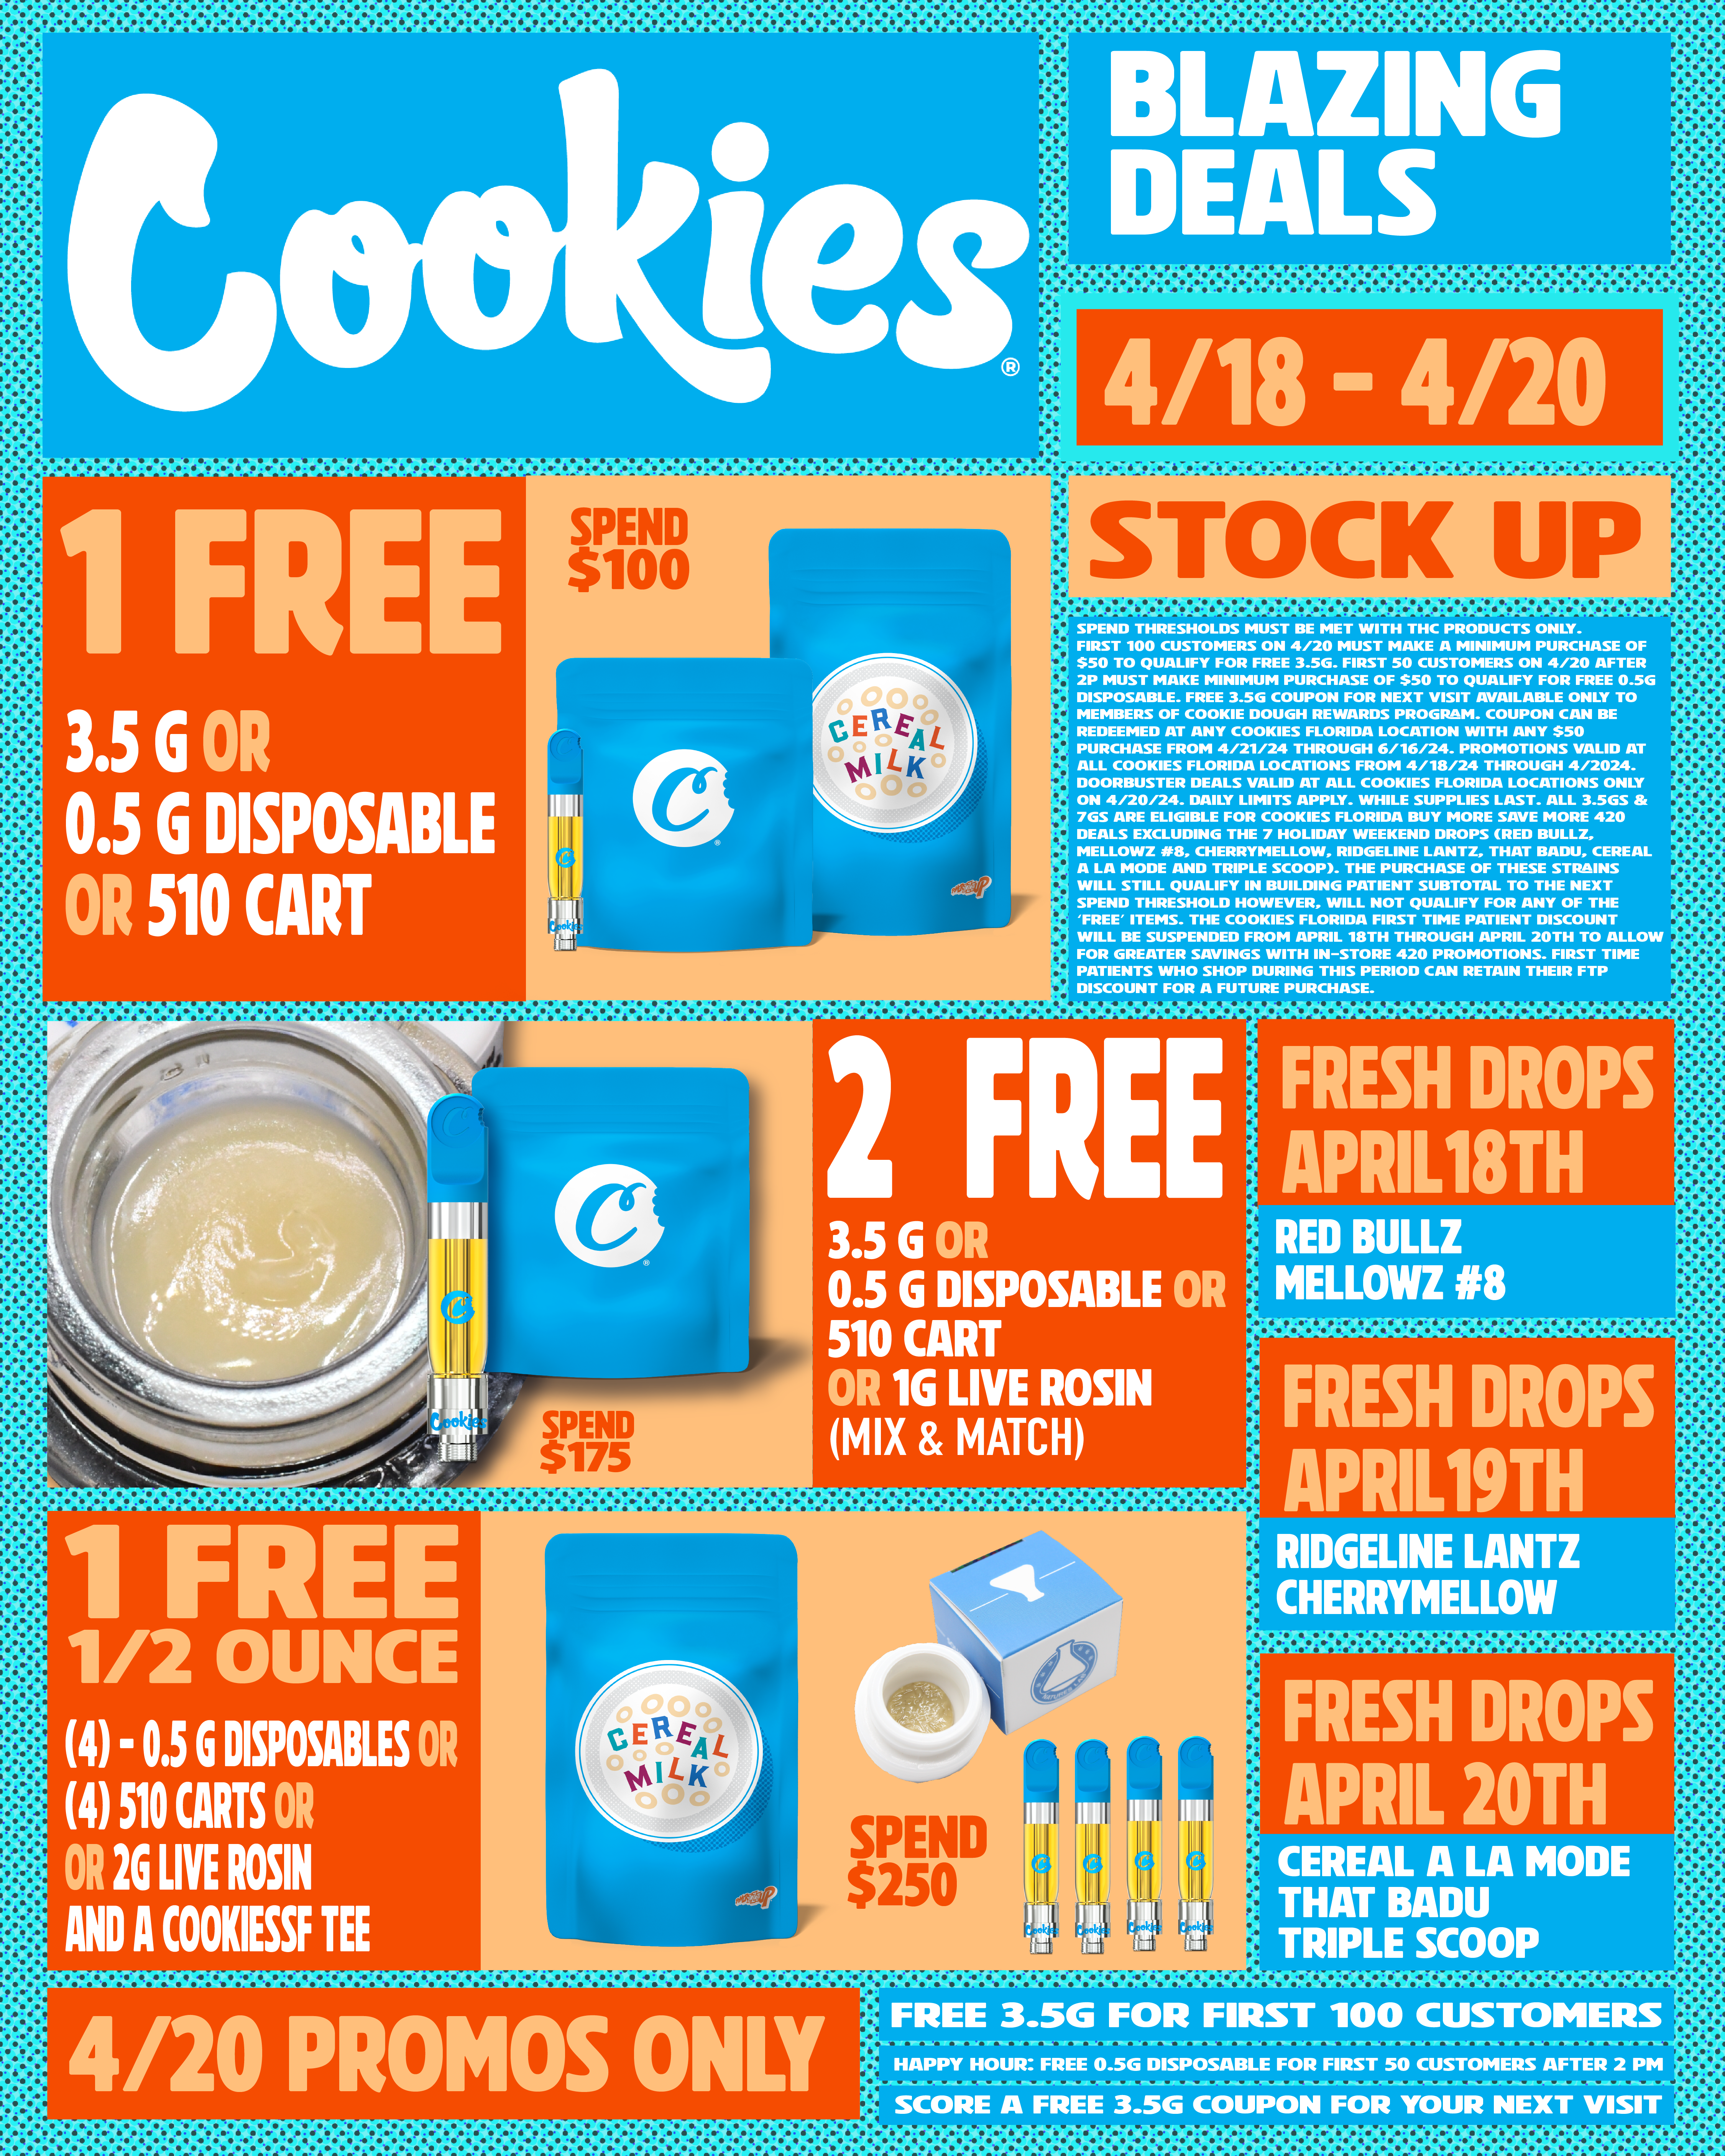 Cookies Florida stores 420 Holistic Lineup UPDATED 4.18